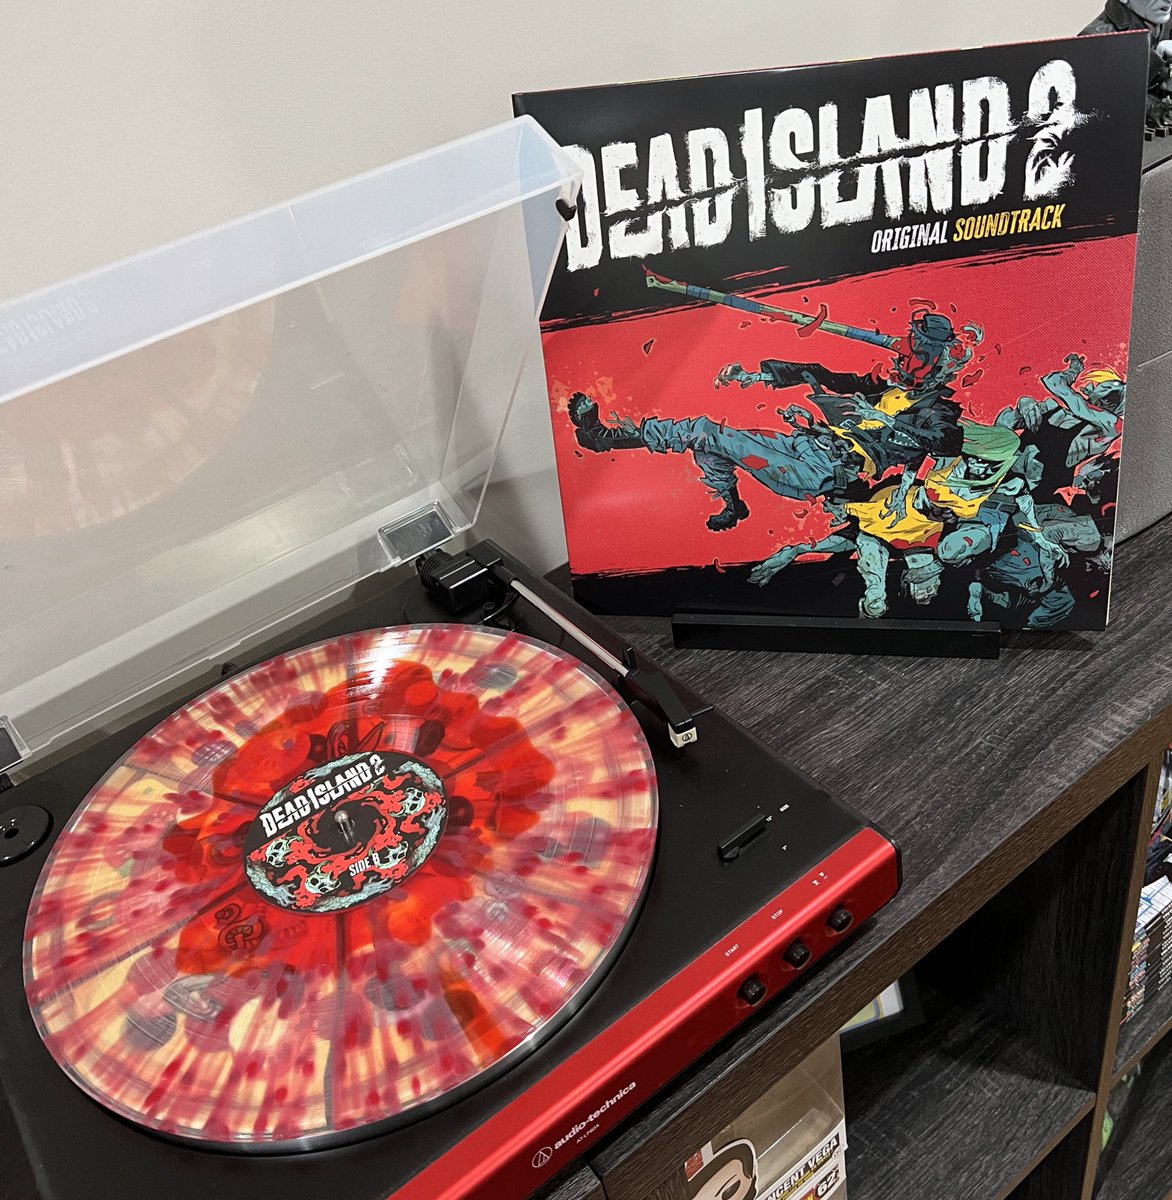 I’ve been having my fun playing DEAD ISLAND 2 and its DLC expansions, but most of all I’ve been digging the original score. Didn’t think we’d ever get a vinyl, but here we are. Sways between beach bum vibes, dystopian industrial rock, and horror-forward orchestral gloom.